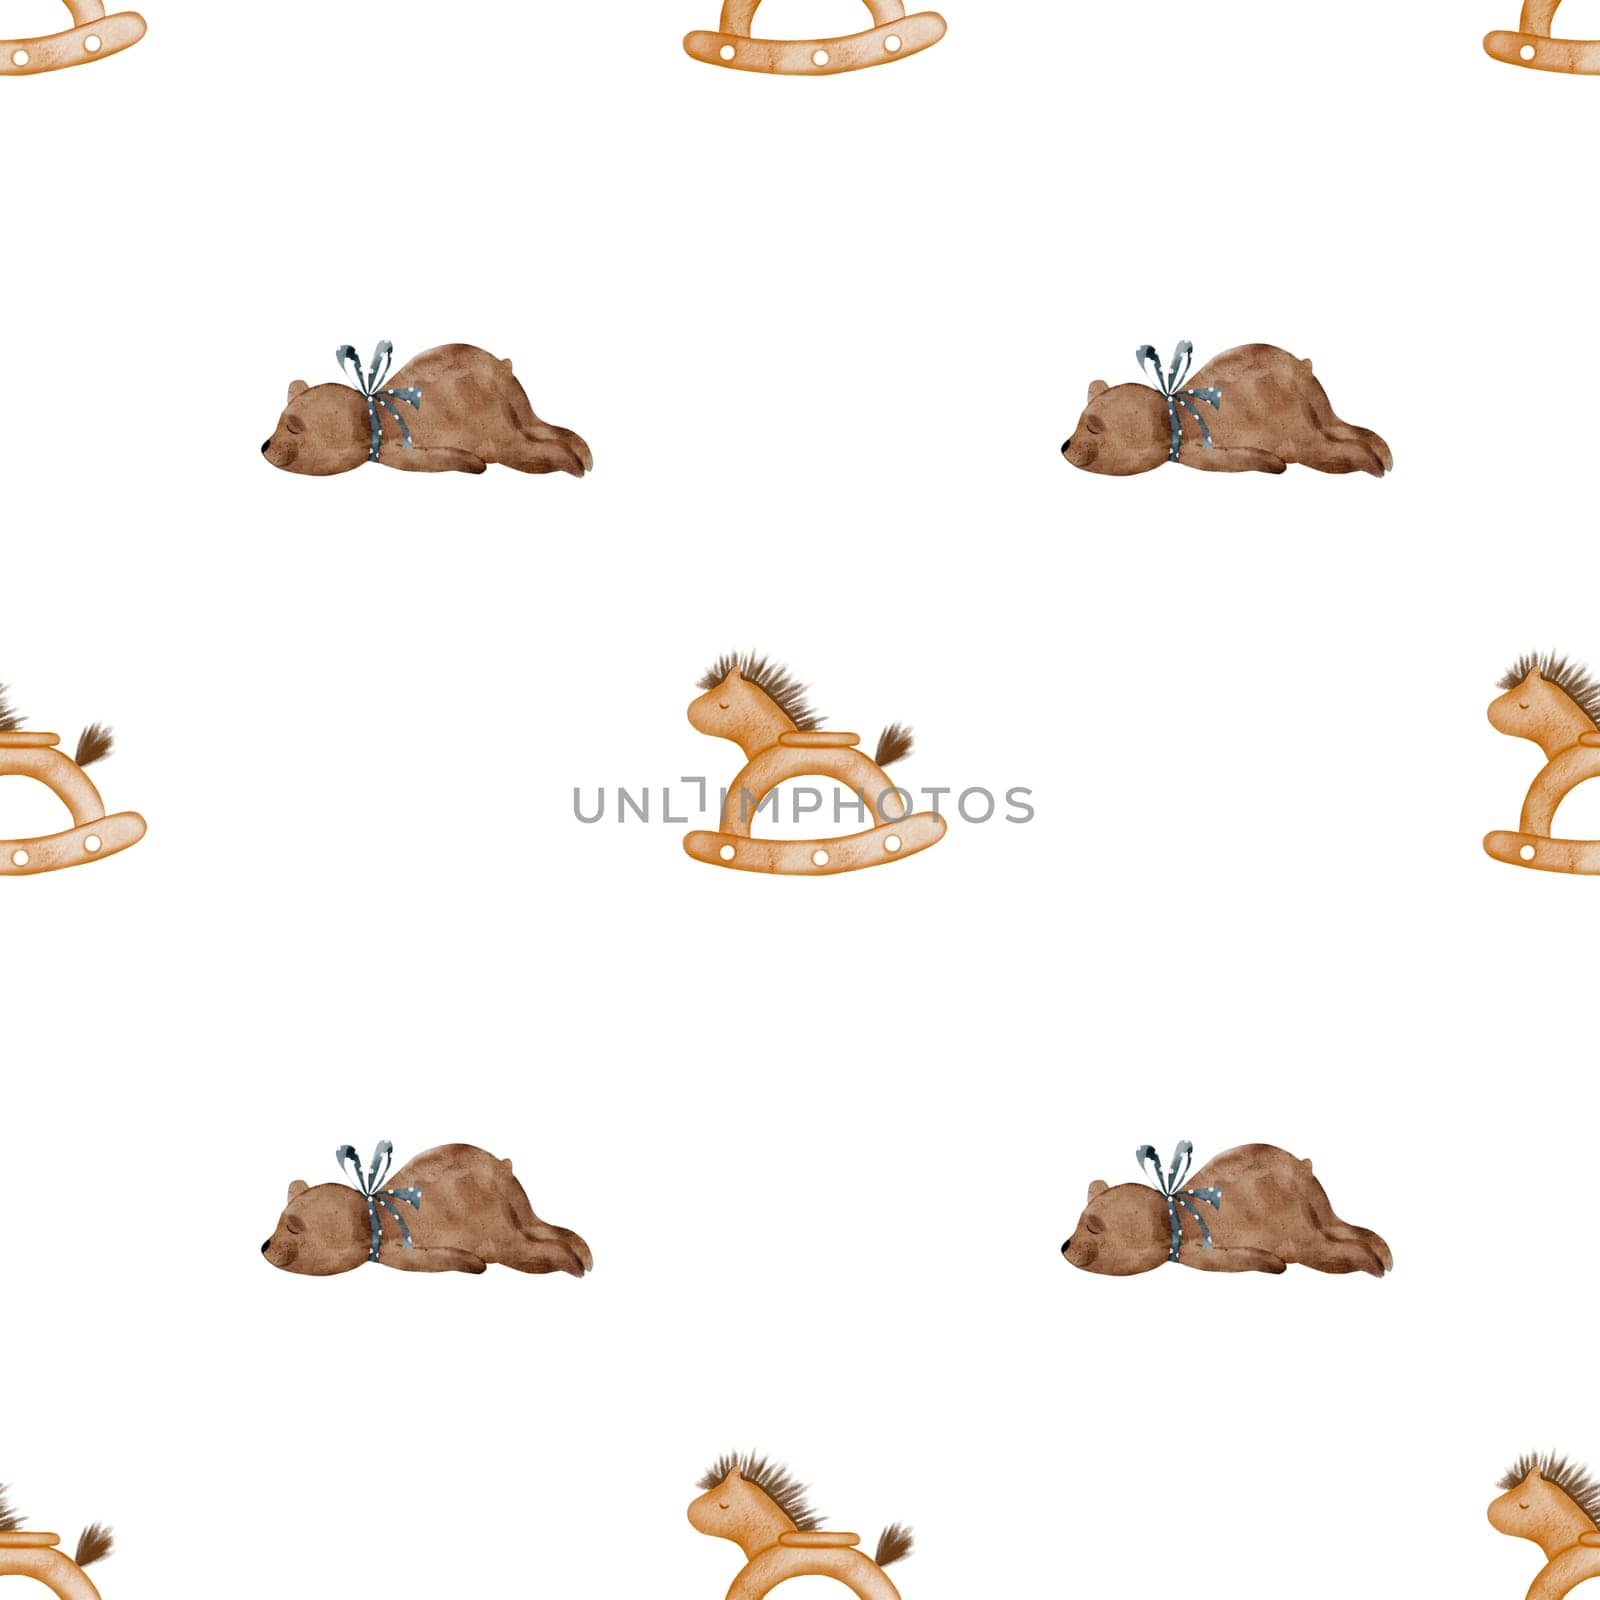 Watercolor seamless pattern of cute little plush bear with a blue bow and a wooden vintage horse. Kawaii drawing with an adorable teddy and a toy on a white background. For printing on children's textiles and baby shower wrapping paper. High quality illustration